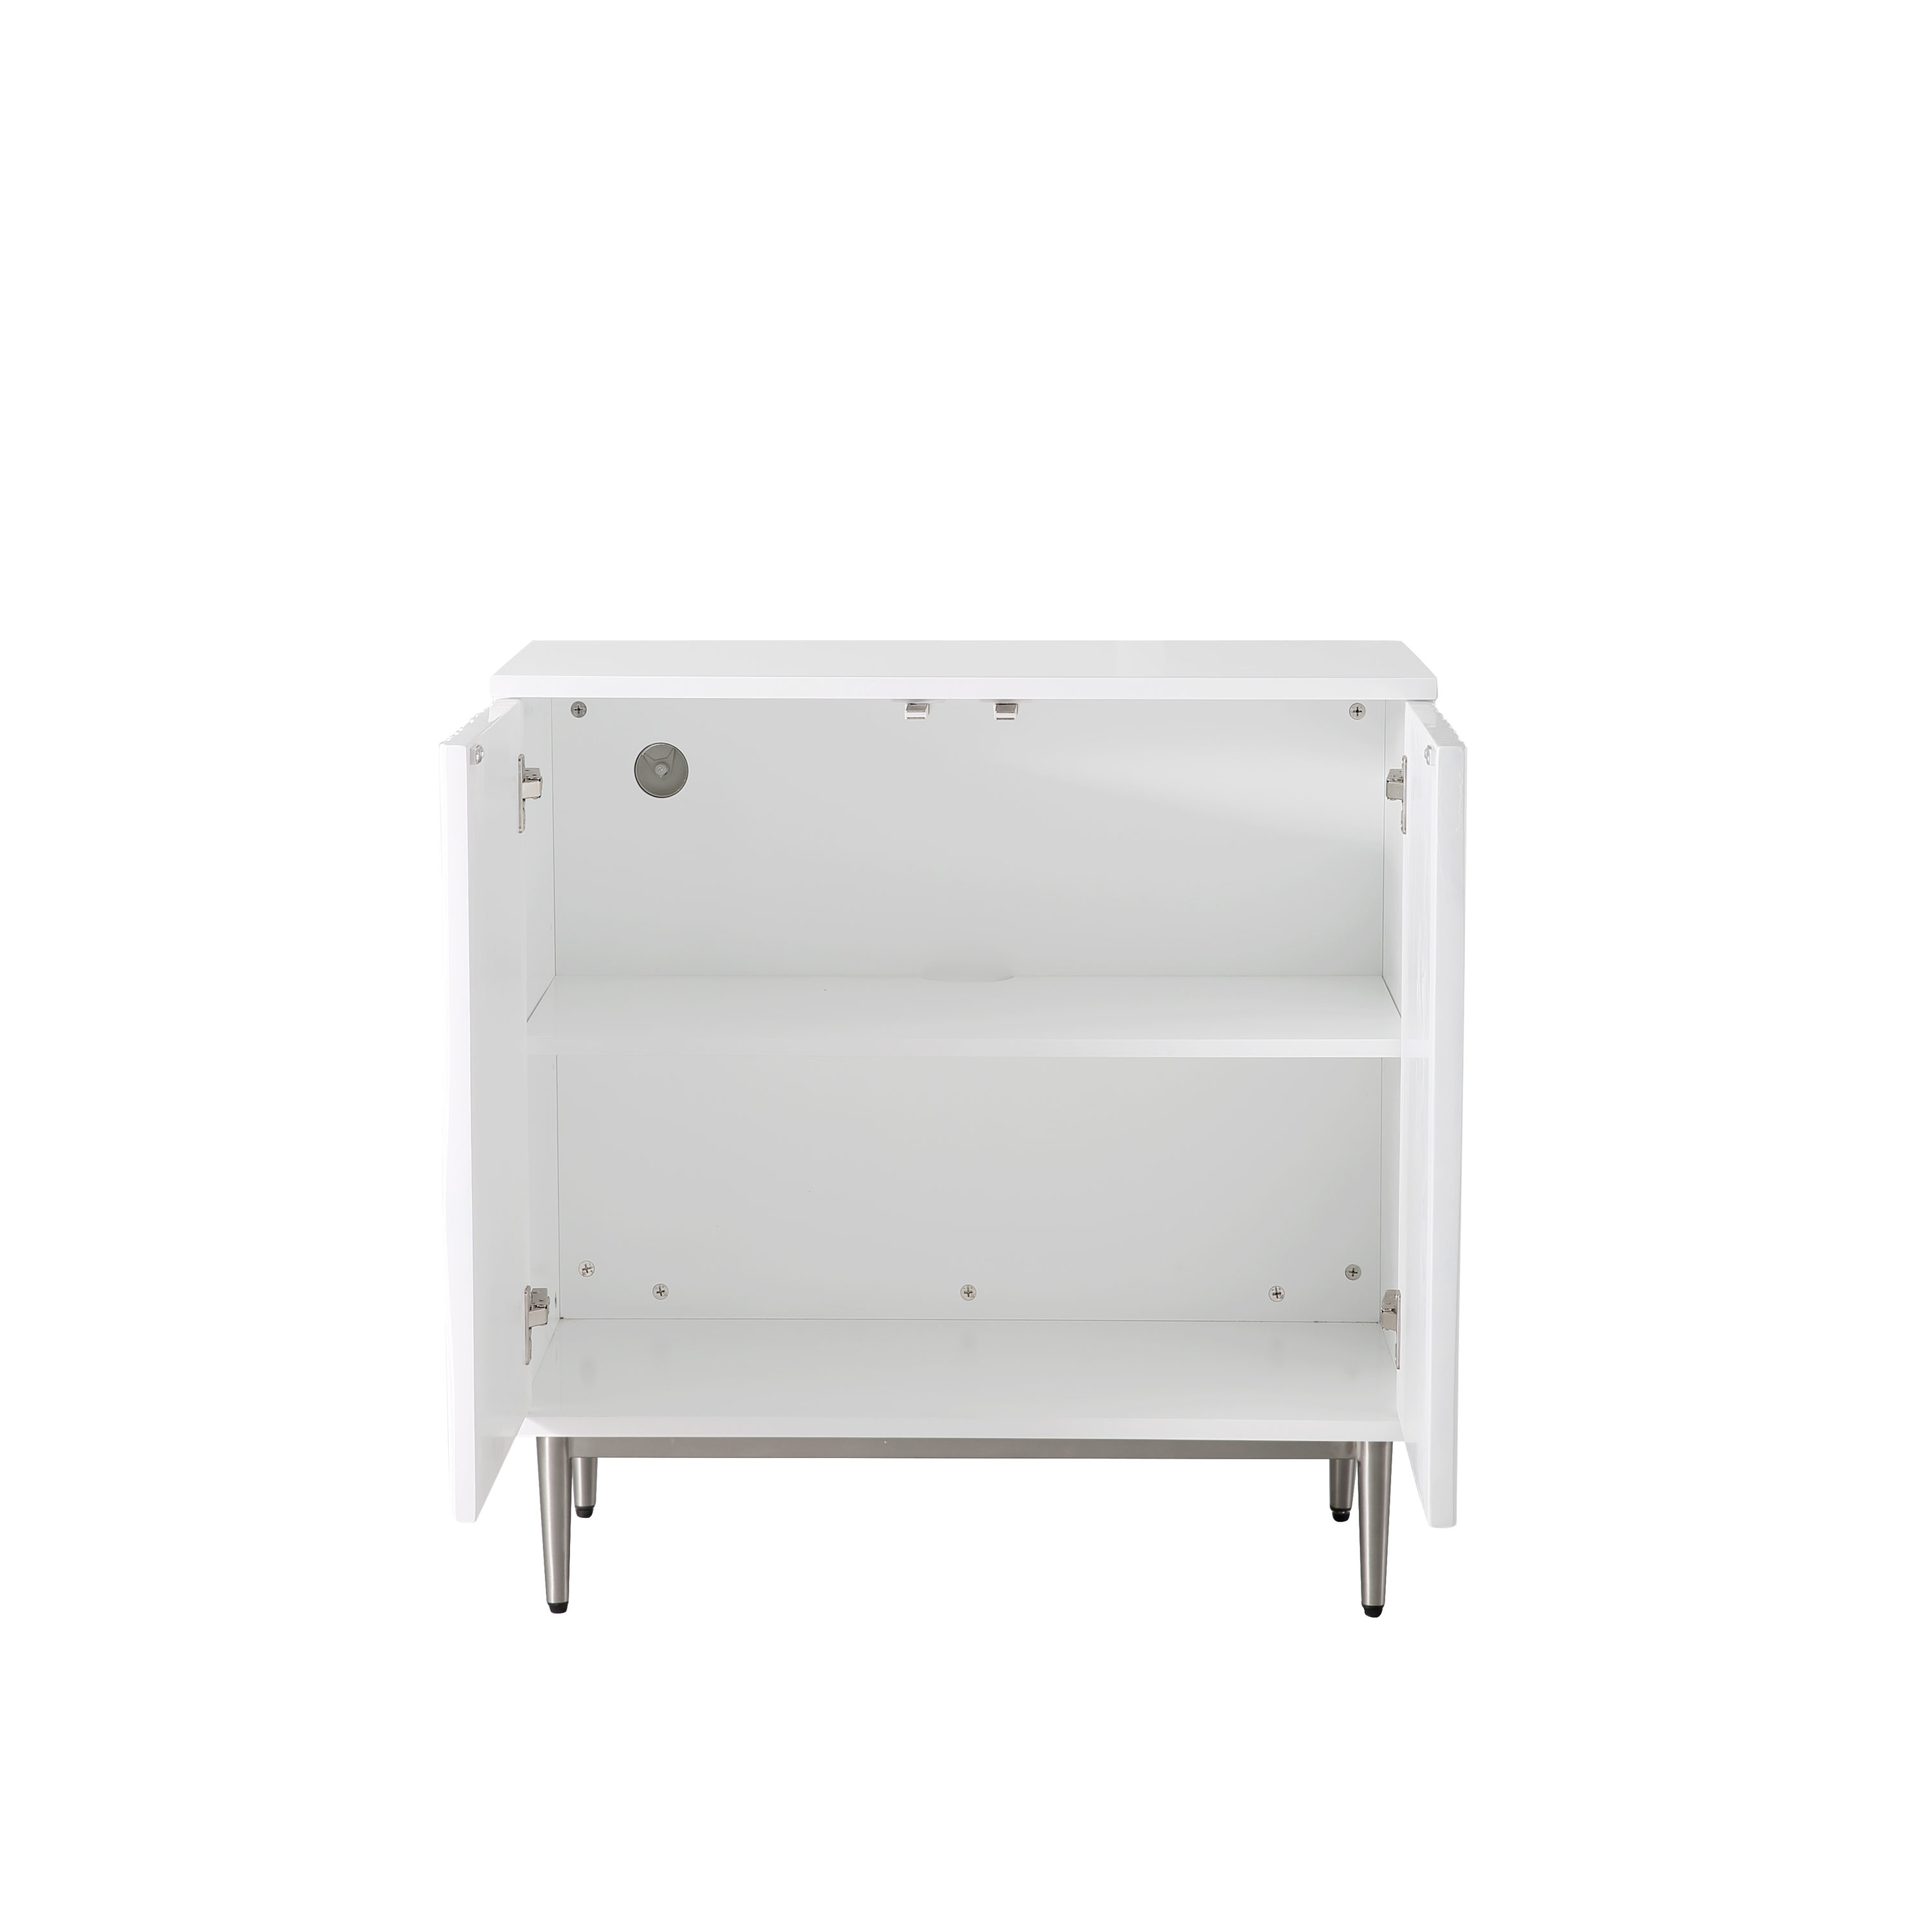 CASAINC High Gloss White MDF Accent Chest with 2 Doors and Stainless ...